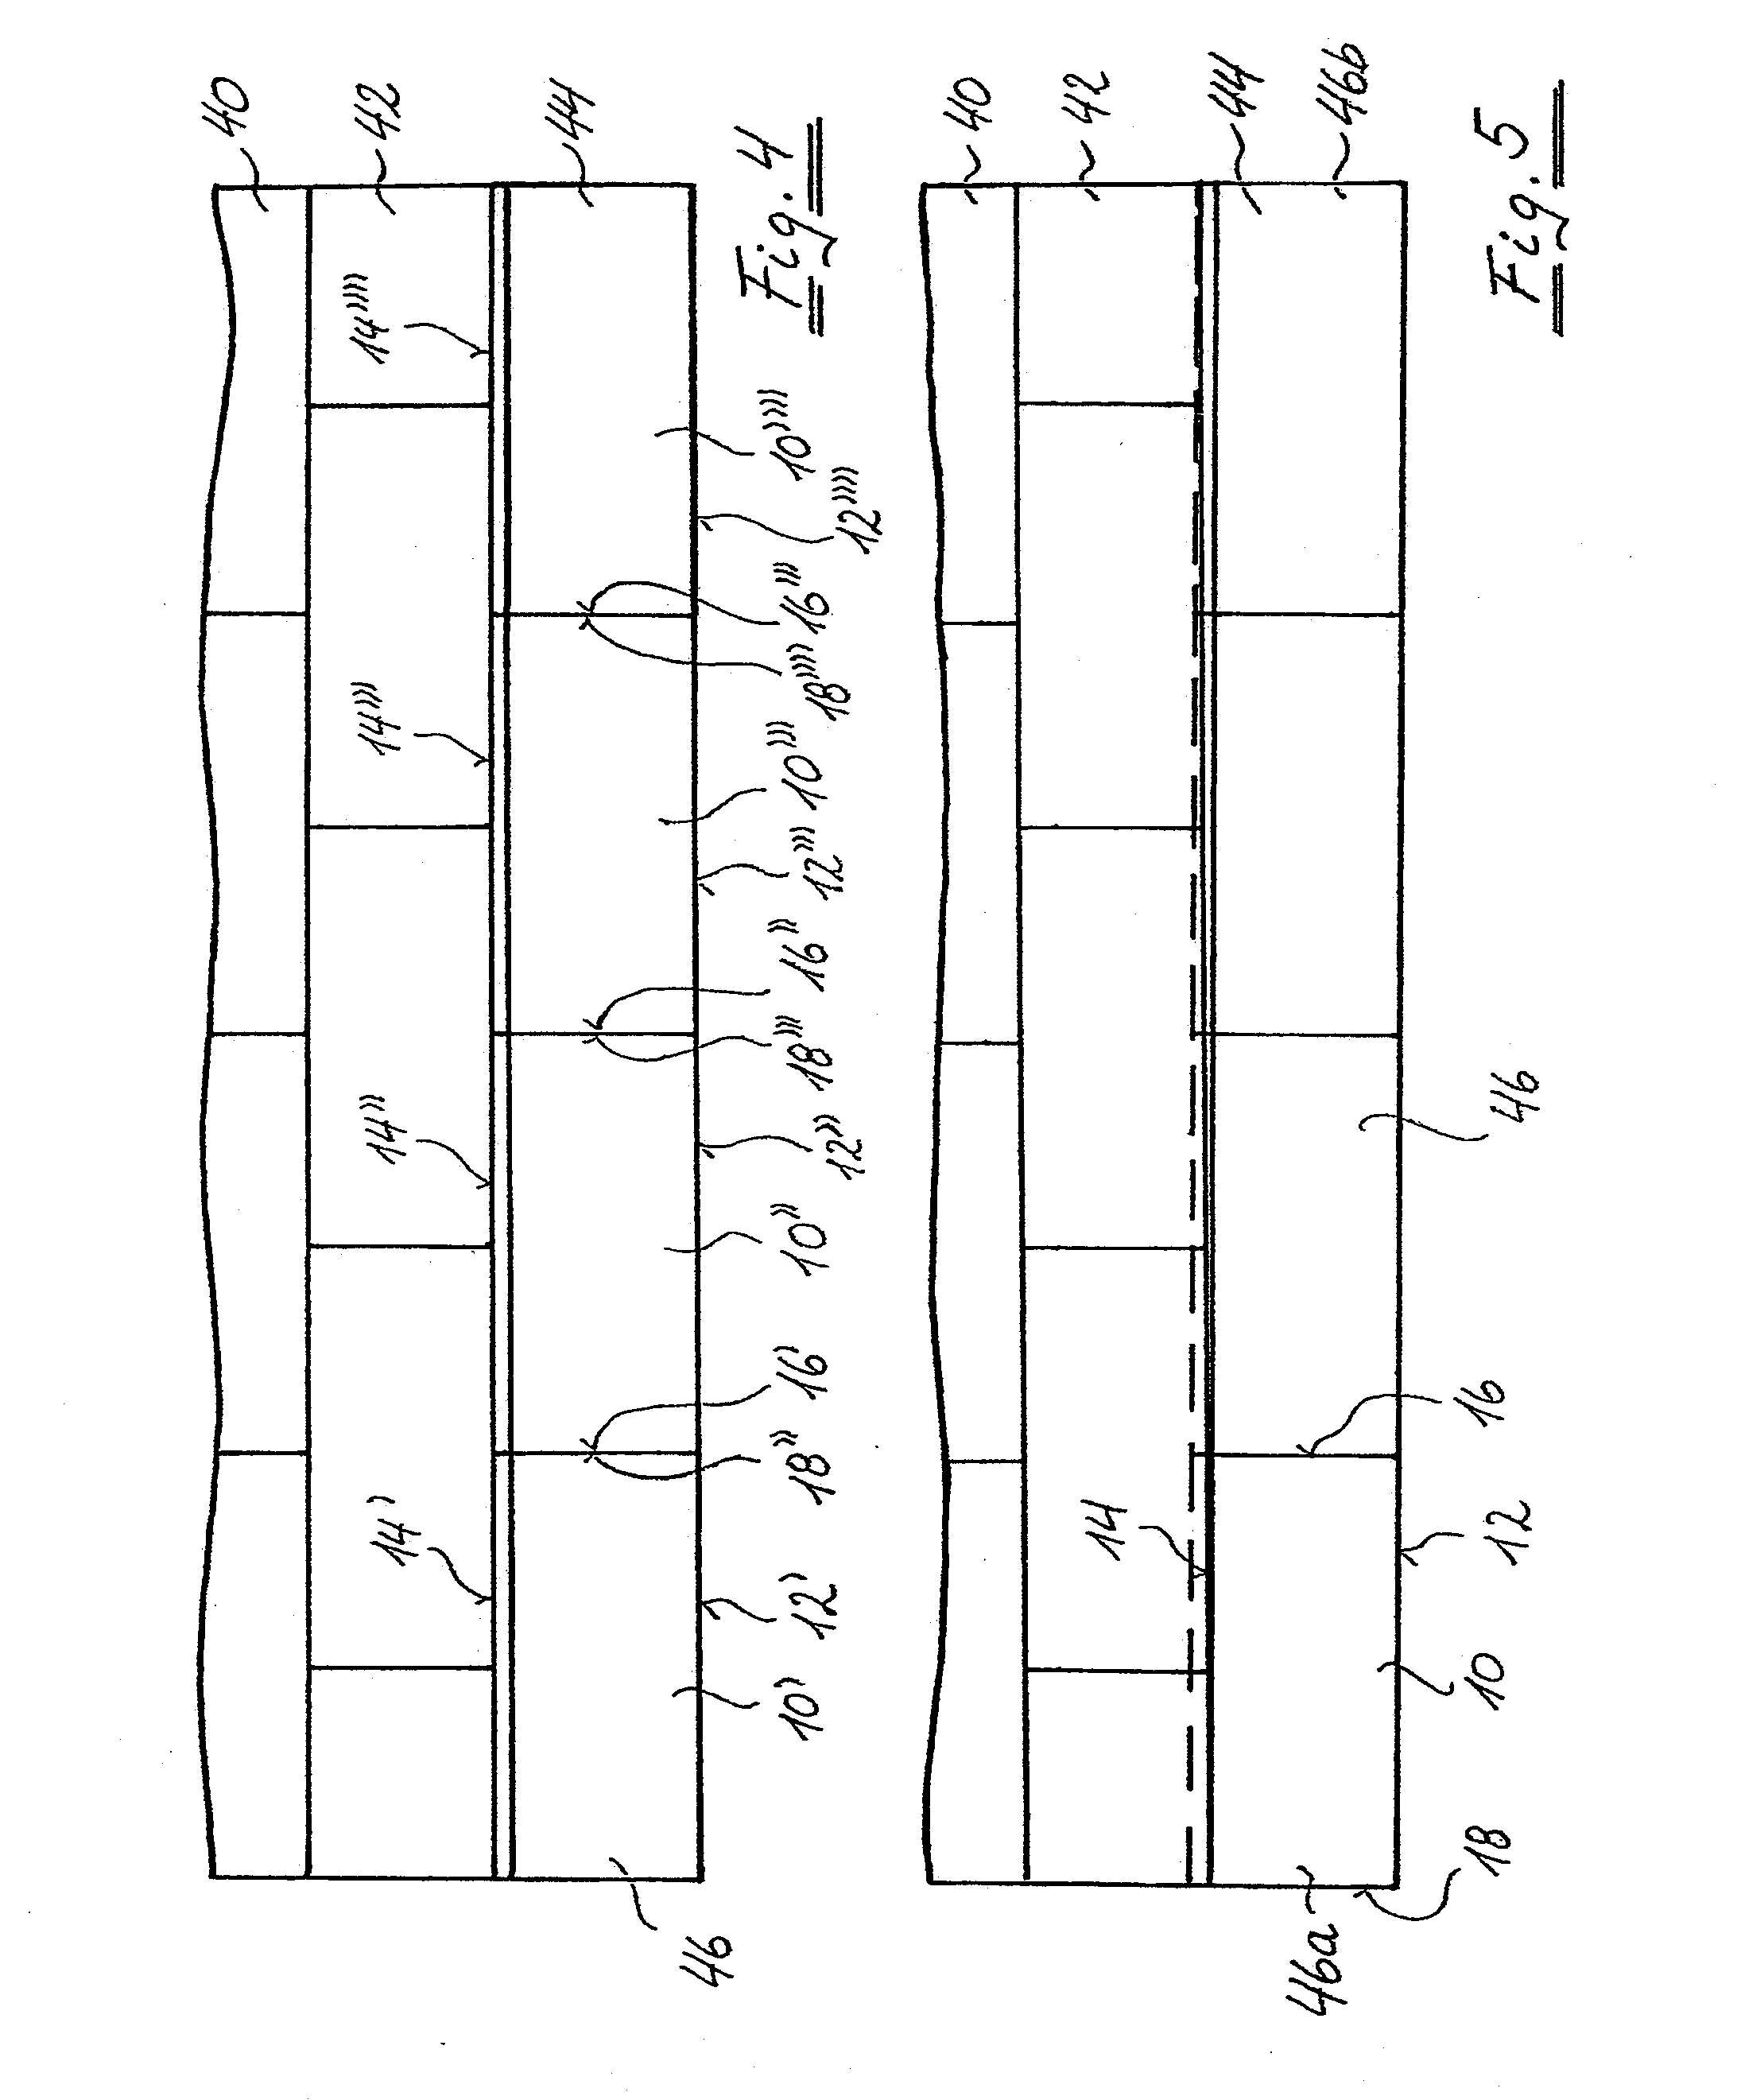 Method for Placing and Mechanically Connecting Panels